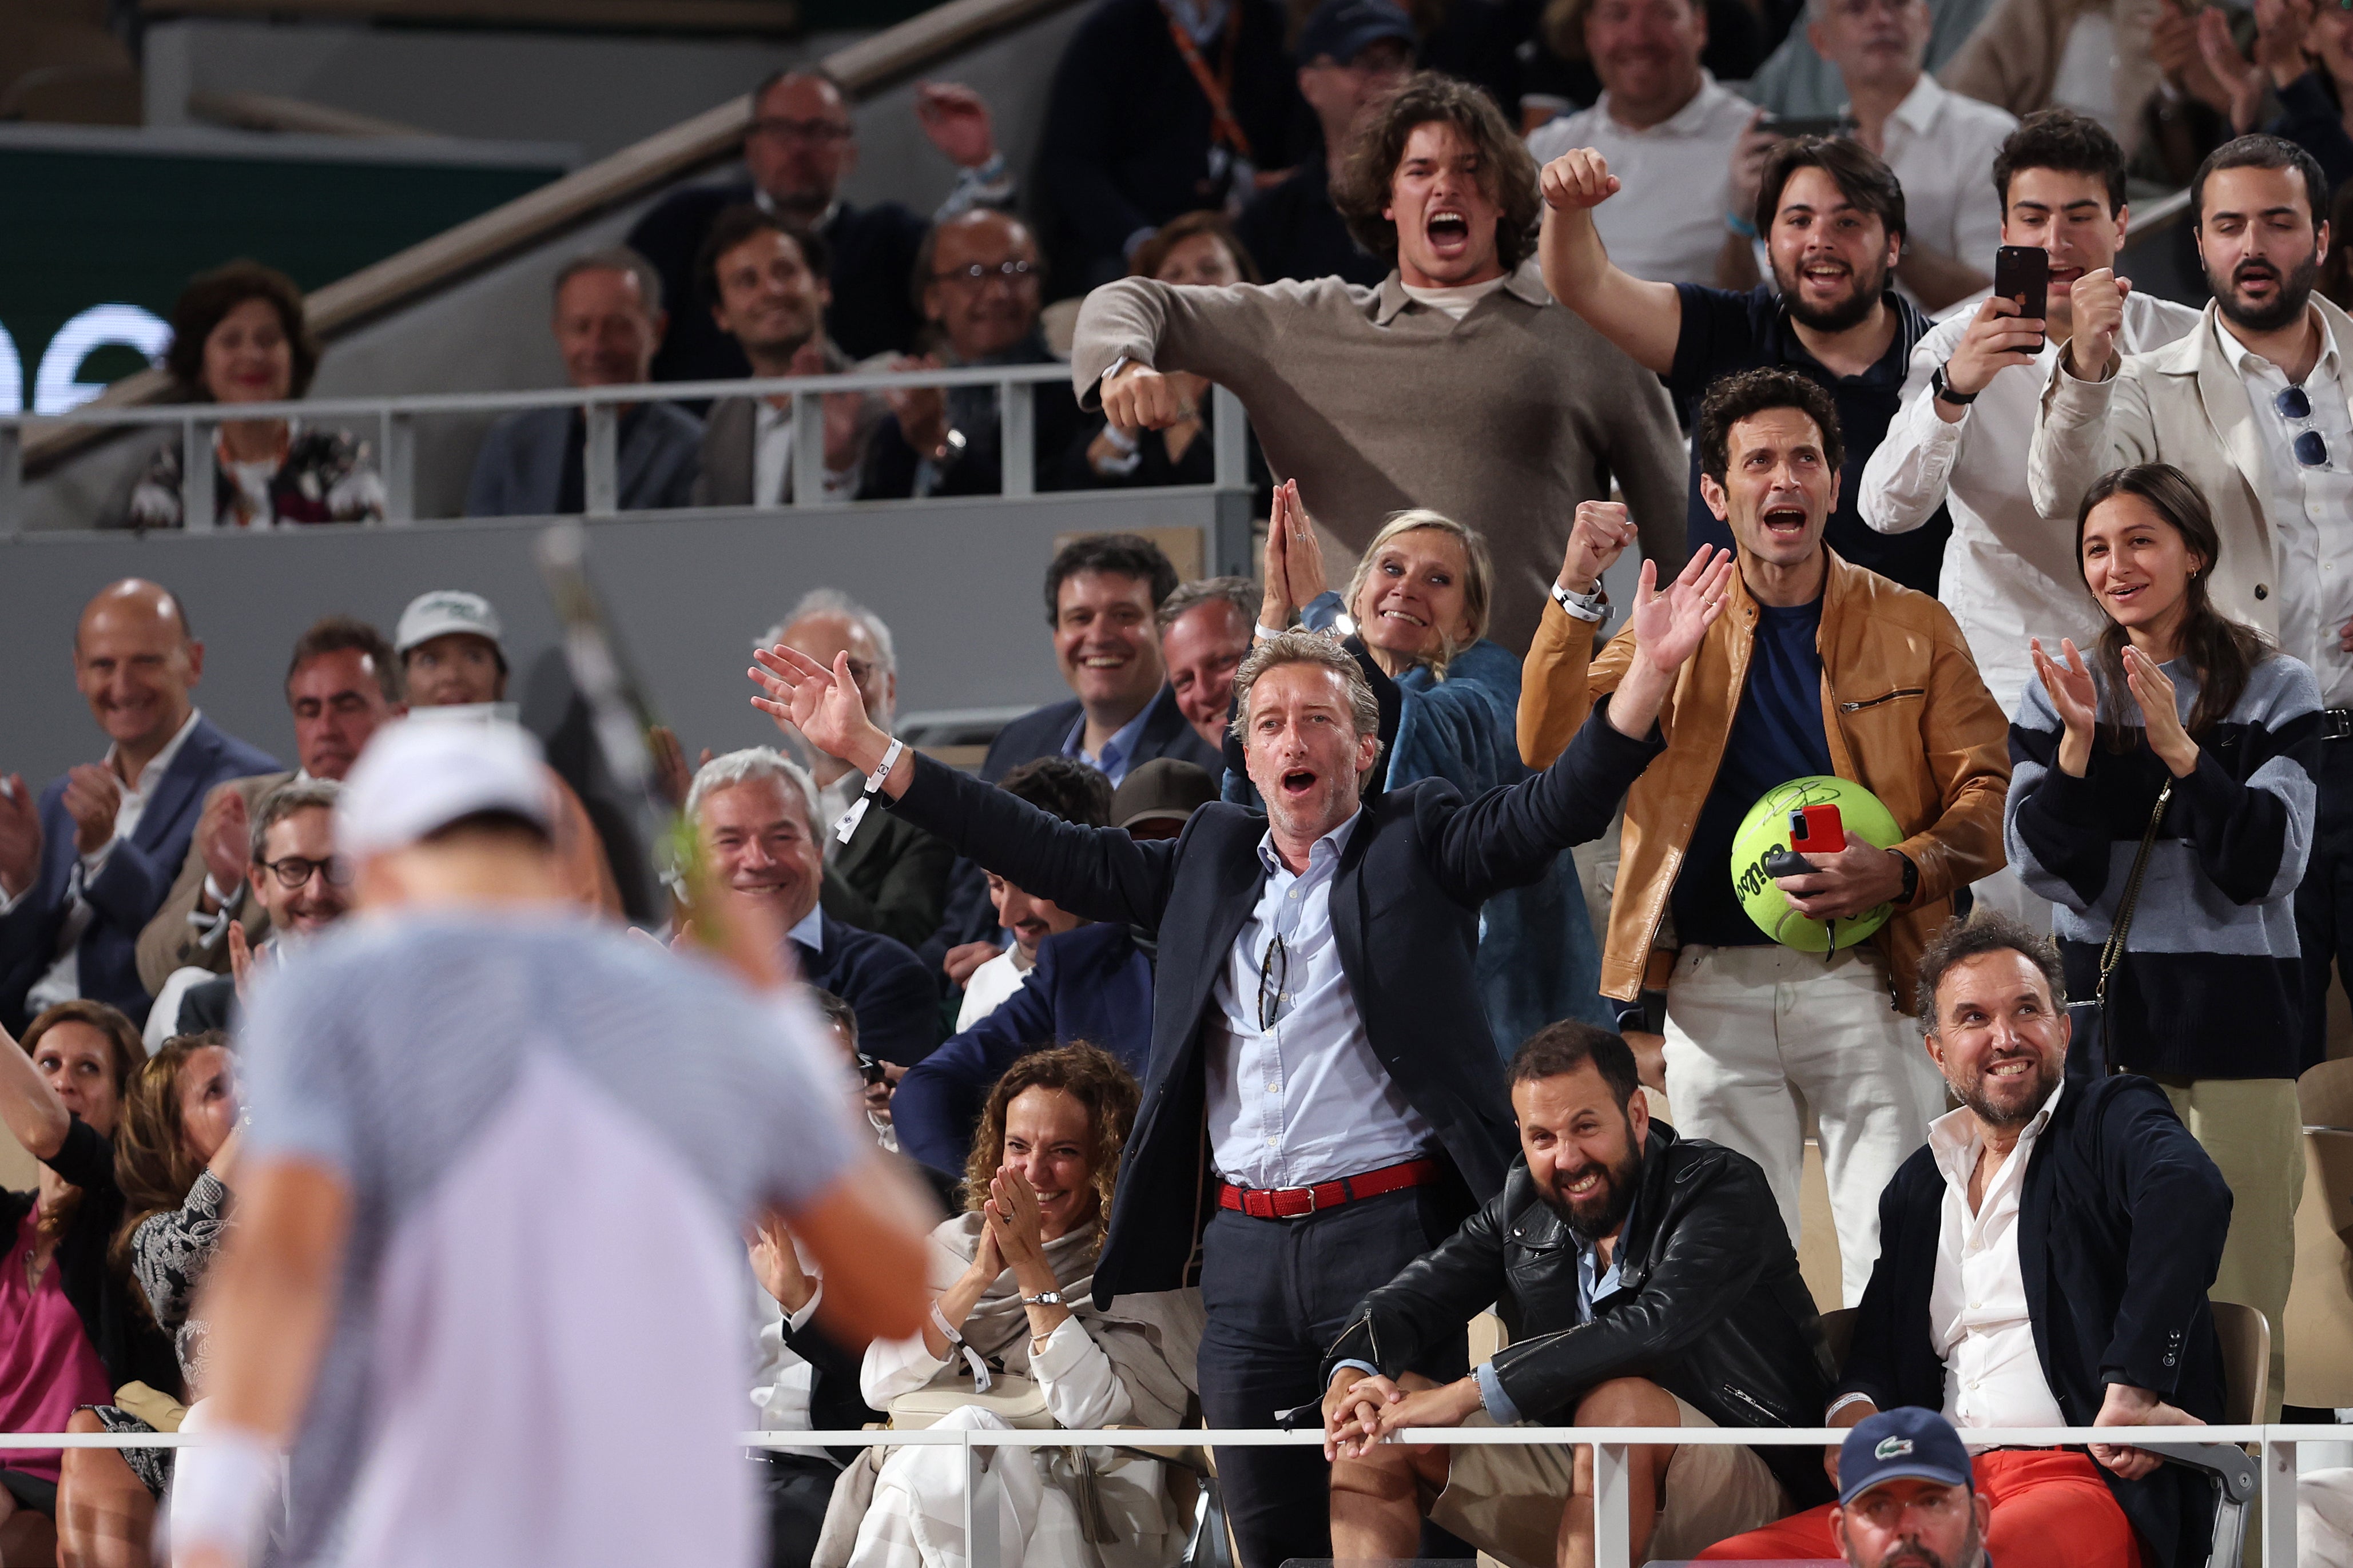 French Open chiefs are cracking down on rowdy behaviour in the stands